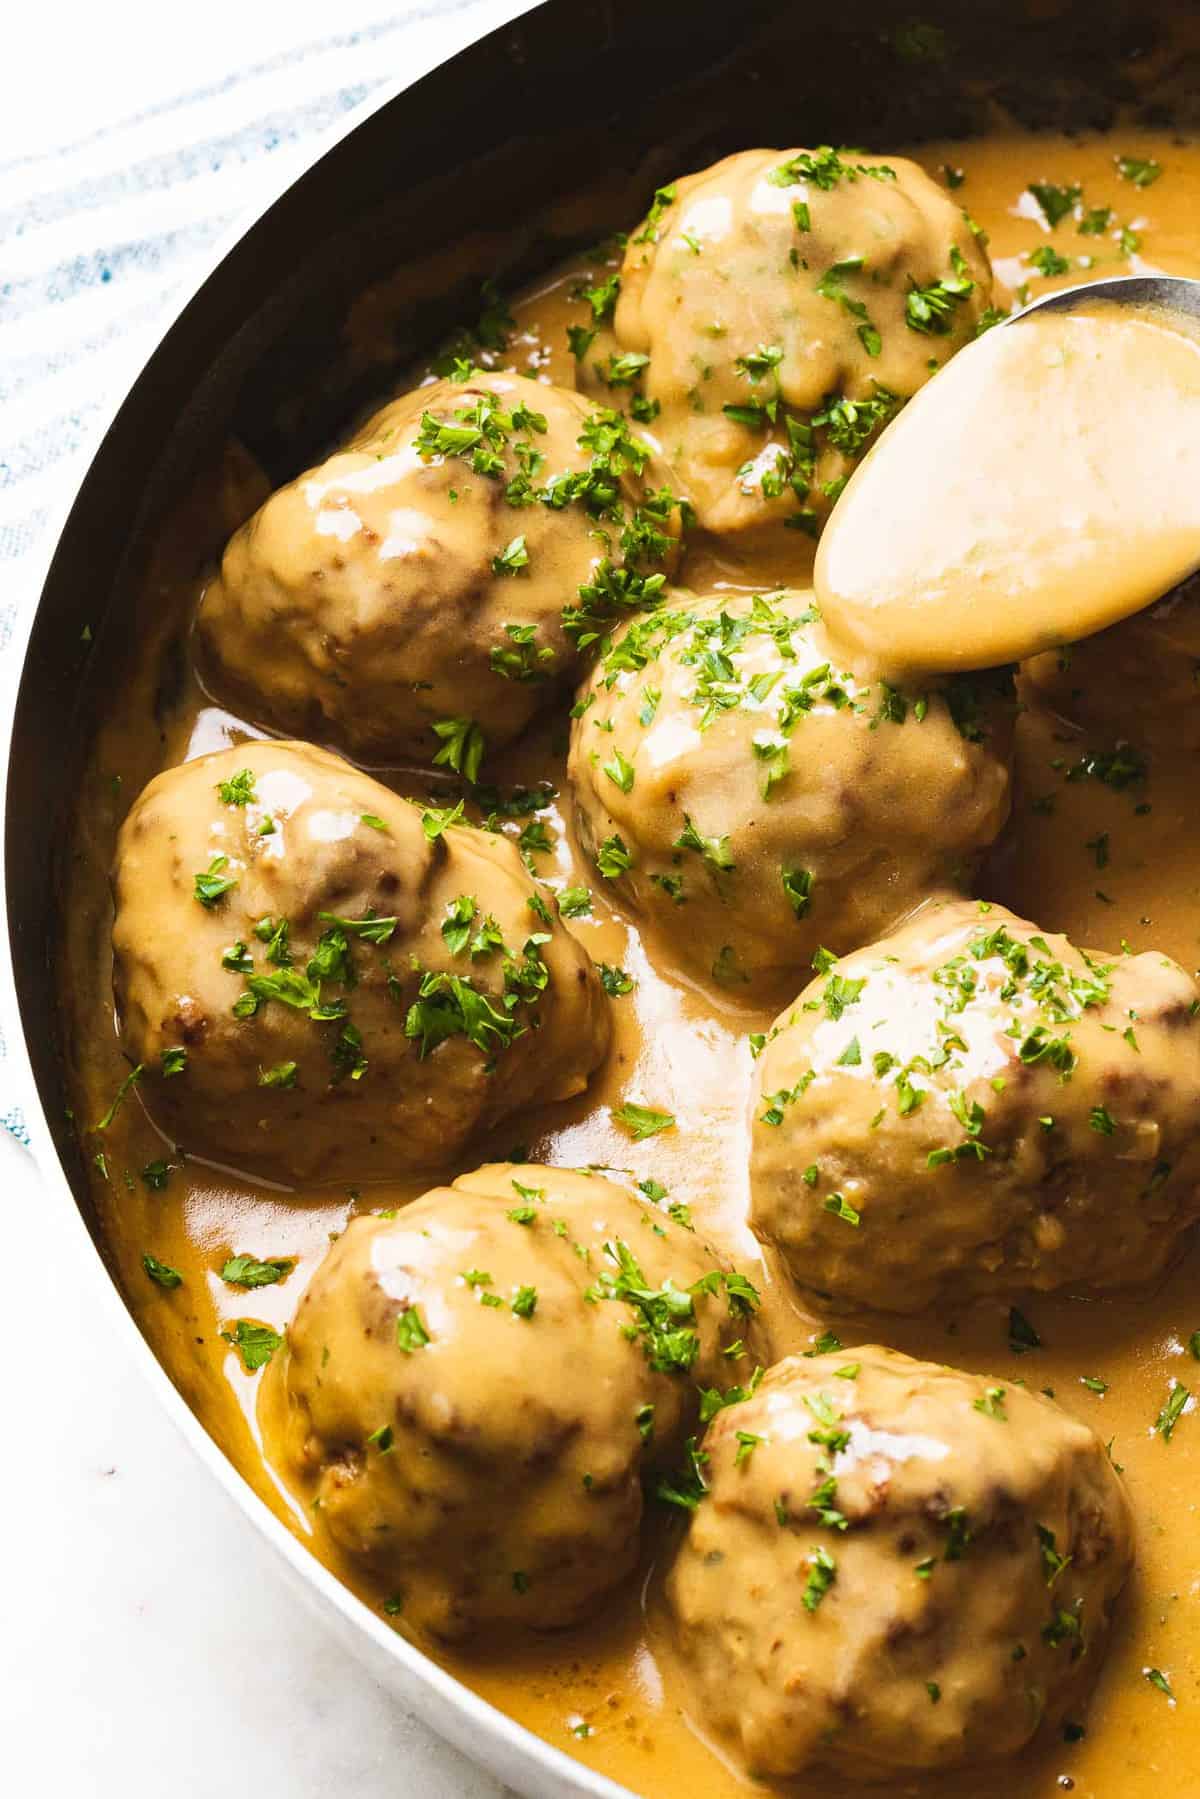 Swedish meatballs with gravy poured on top by spoon.